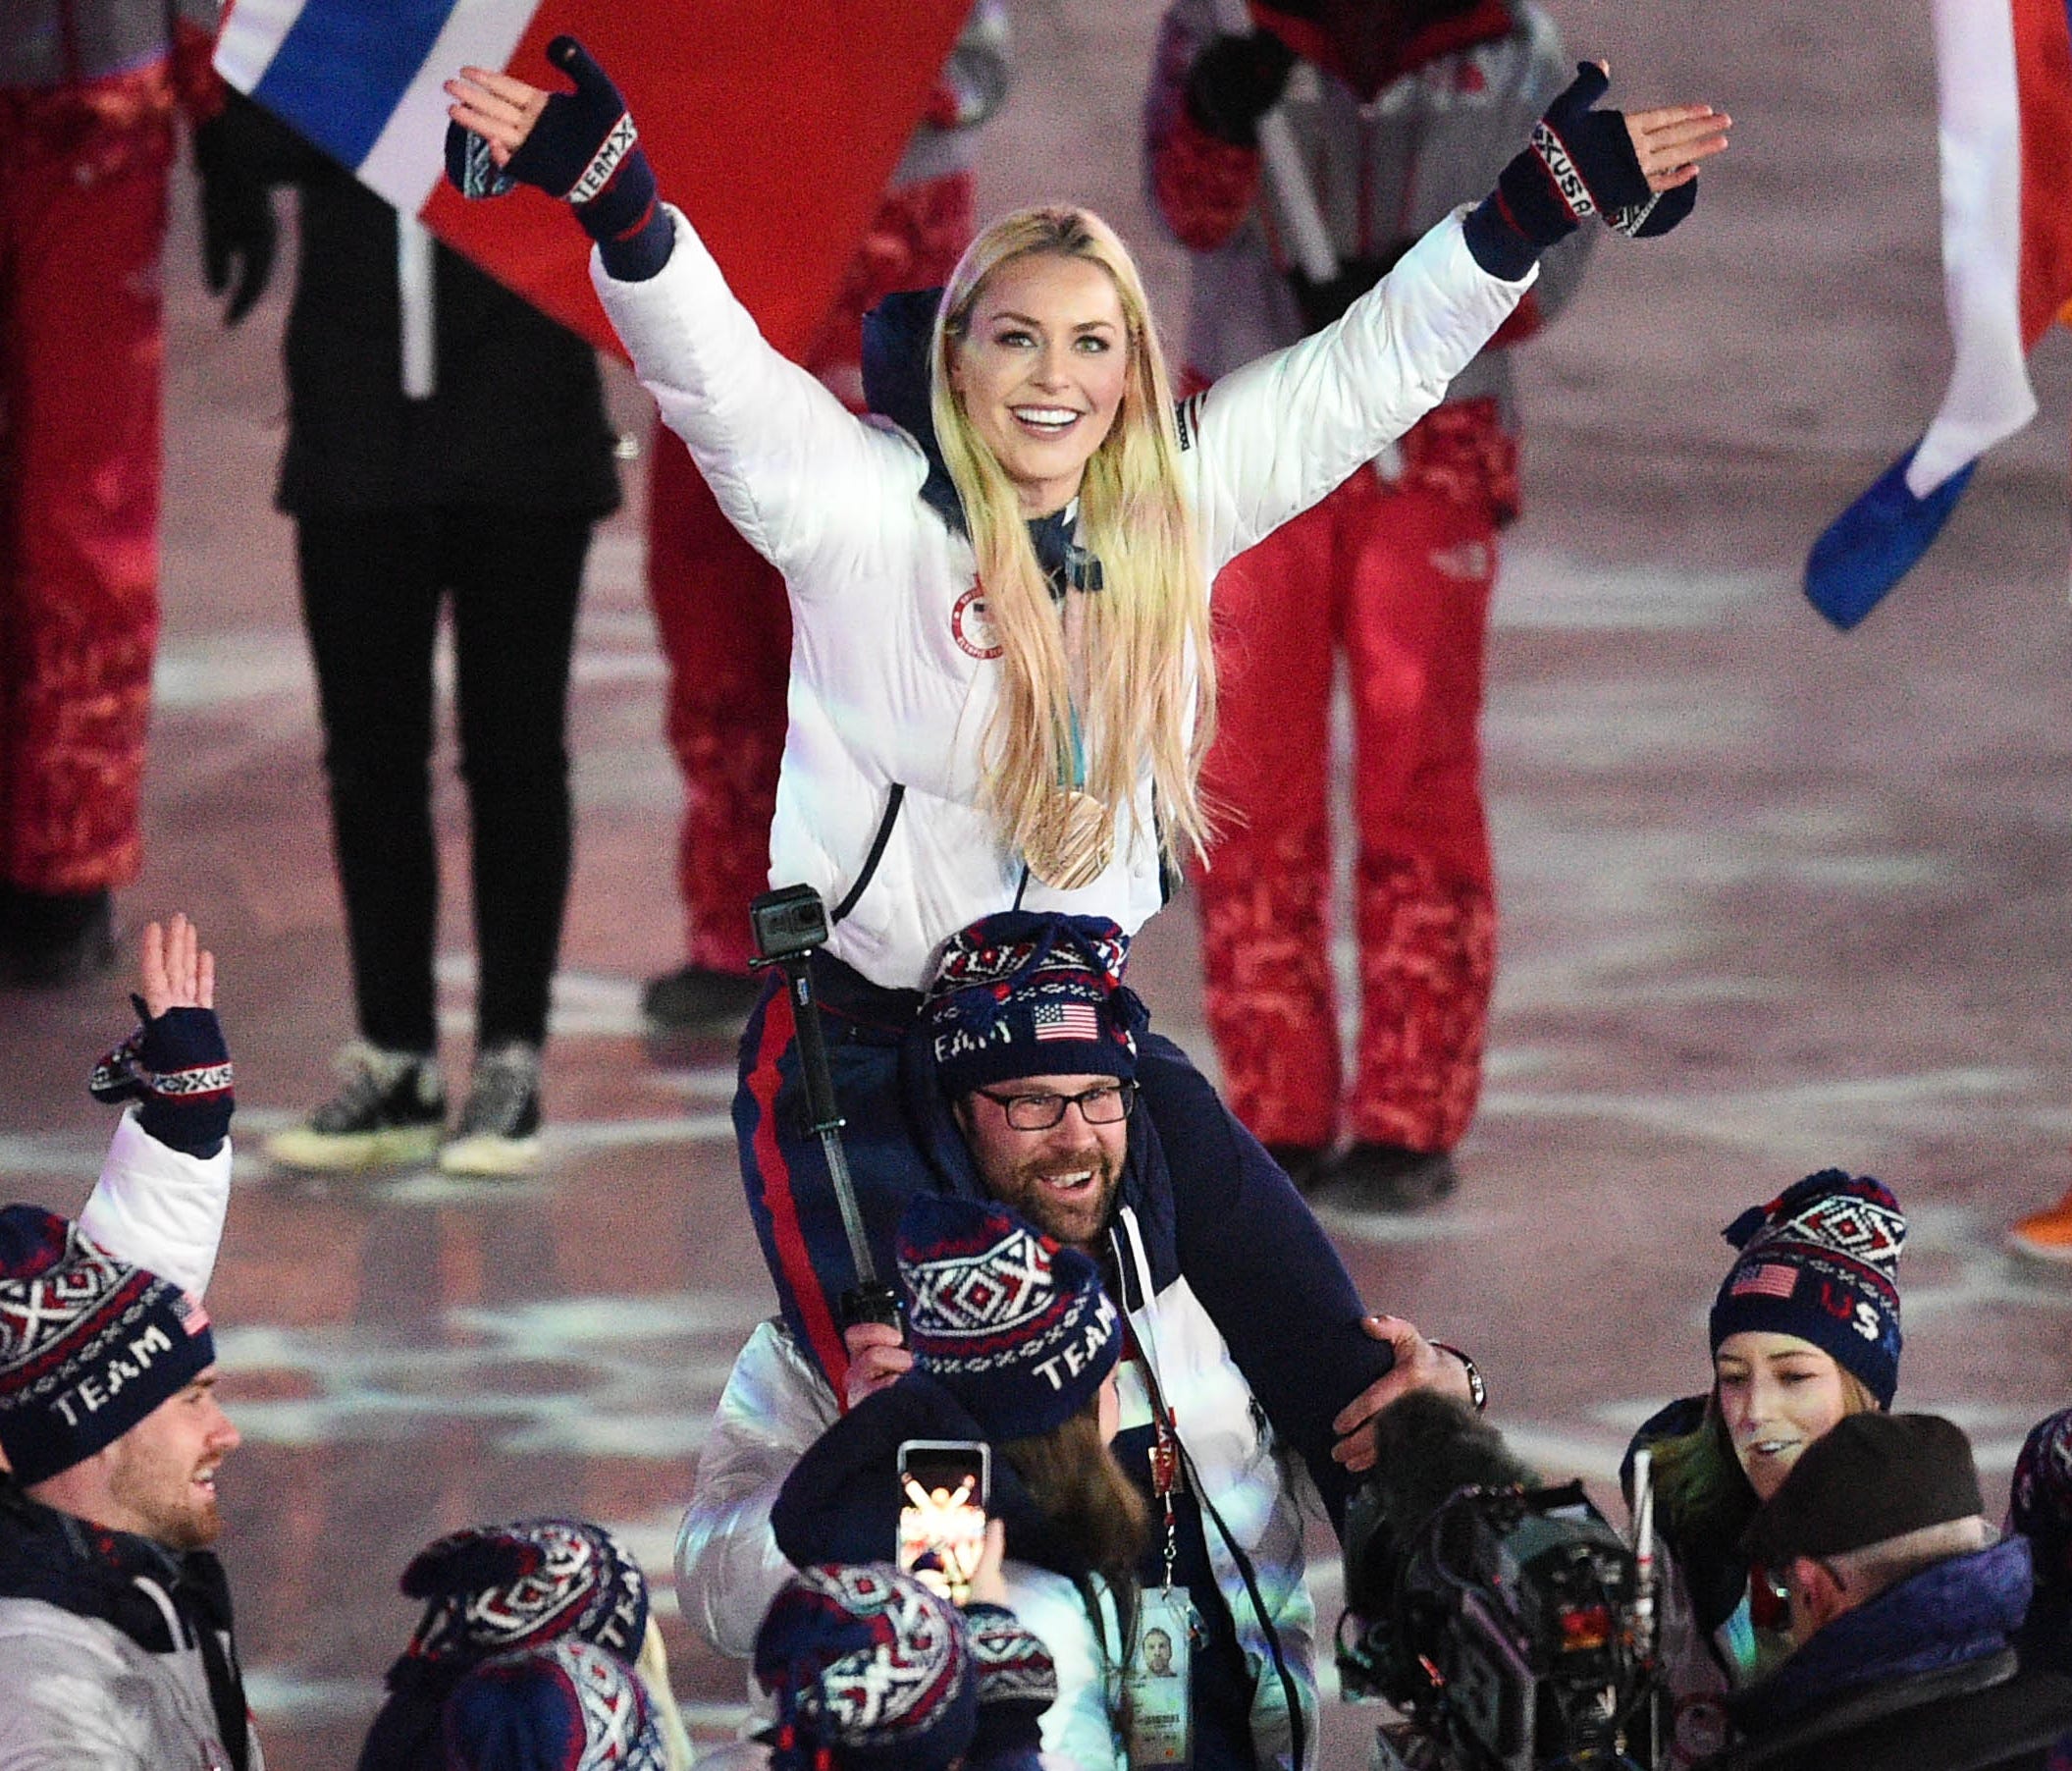 Feb 25, 2018; PyeongChang, South Korea; Lindsey Vonn arrives for the parade of athletes during the closing ceremony for the Pyeongchang 2018 Olympic Winter Games at Pyeongchang Olympic Stadium. Mandatory Credit: Kelvin Kuo-USA TODAY Sports